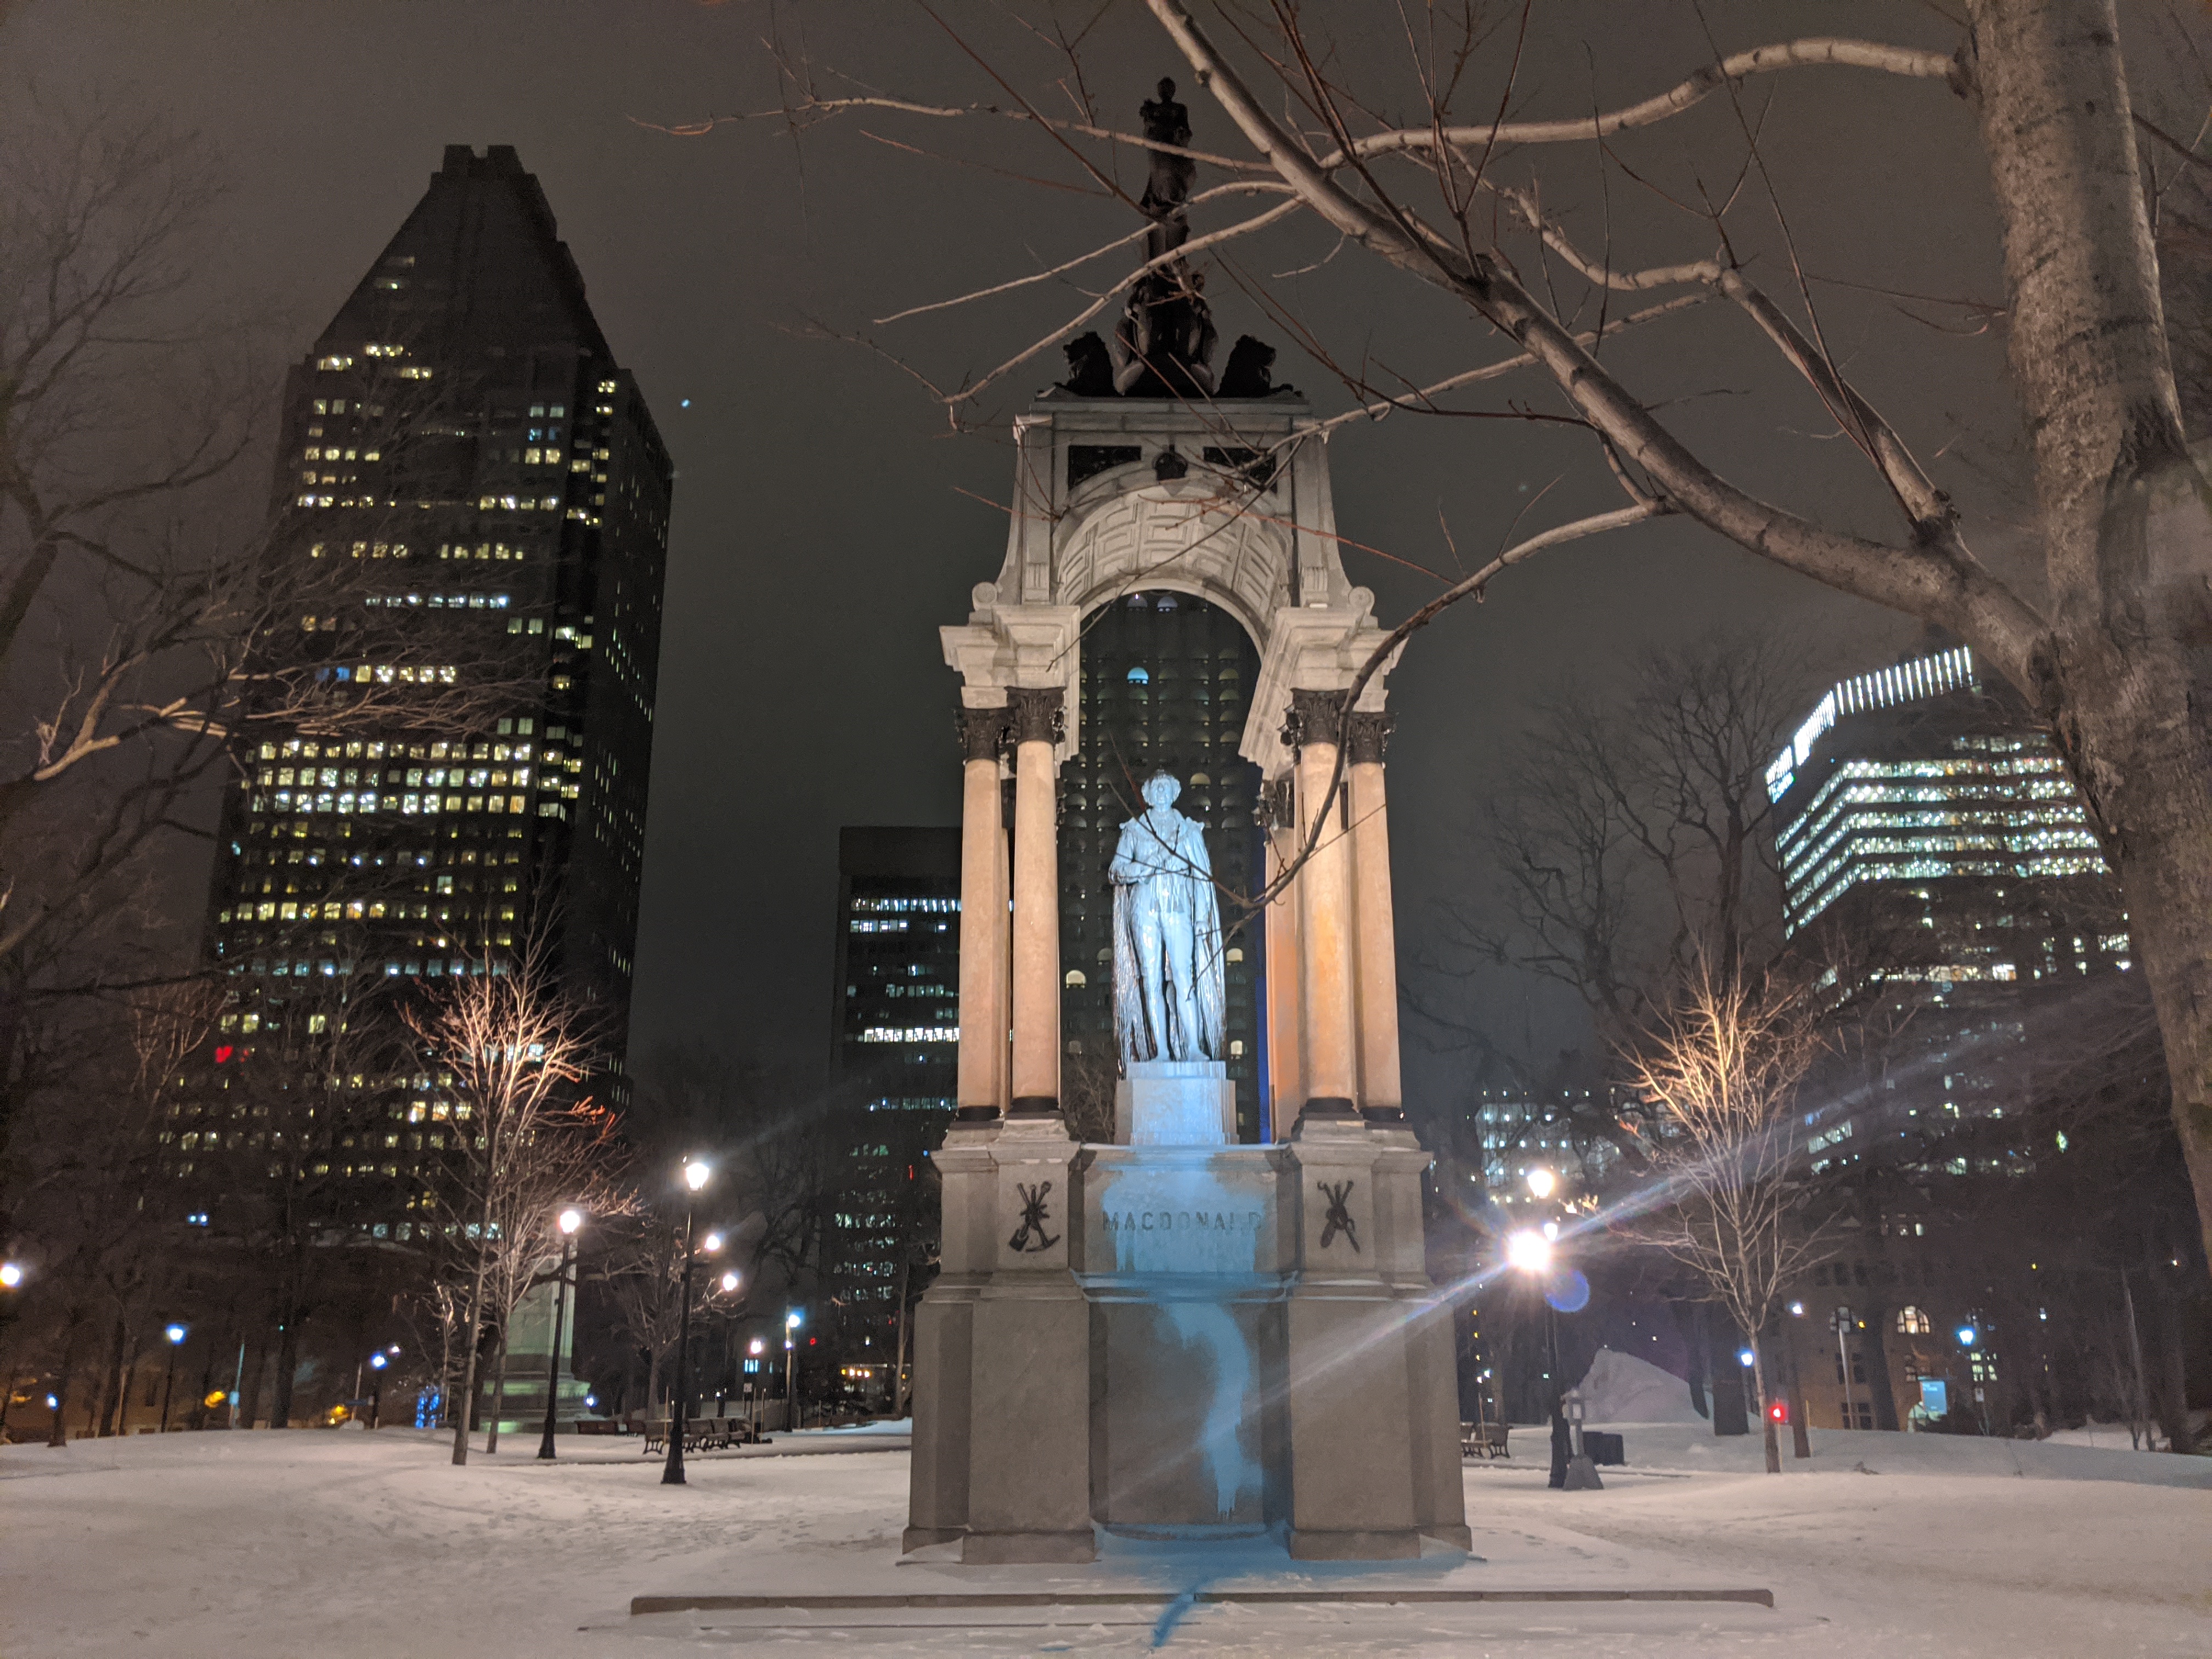 Montreal Macdonald Monument vandalized with paint, in solidarity with anti-pipeline Indigenous Land Defenders